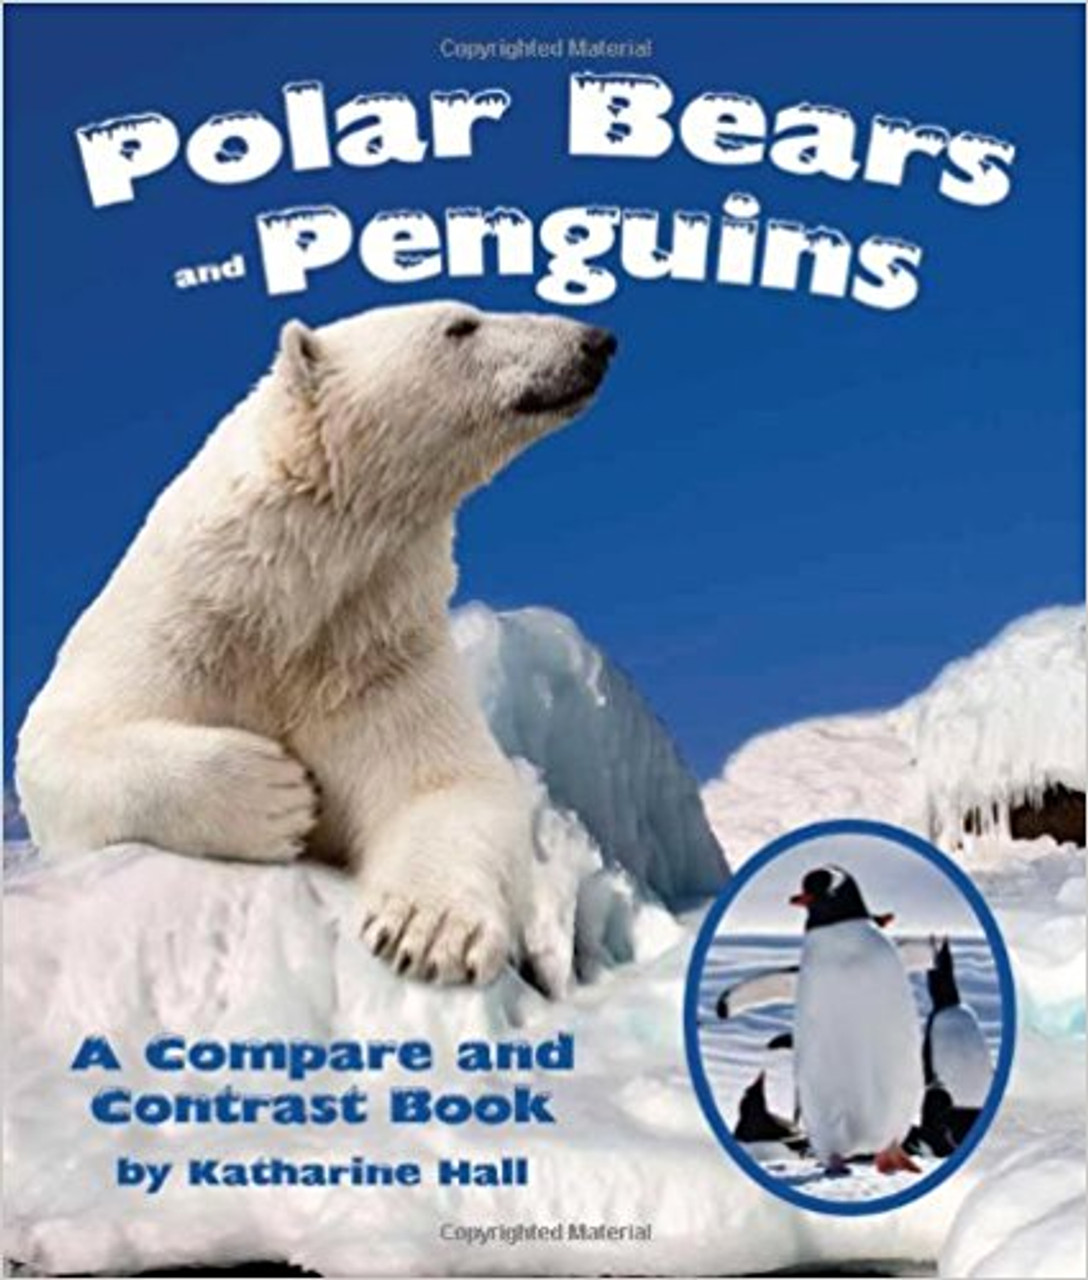 Polar bears and penguins may like cold weather, but they live at opposite ends of the Earth.  What do these animals have in common and how are they different? You might see them together at a zoo, but they would never be found in the same habitats in the wild.  Compare and contrast these polar animals through stunning photographs."